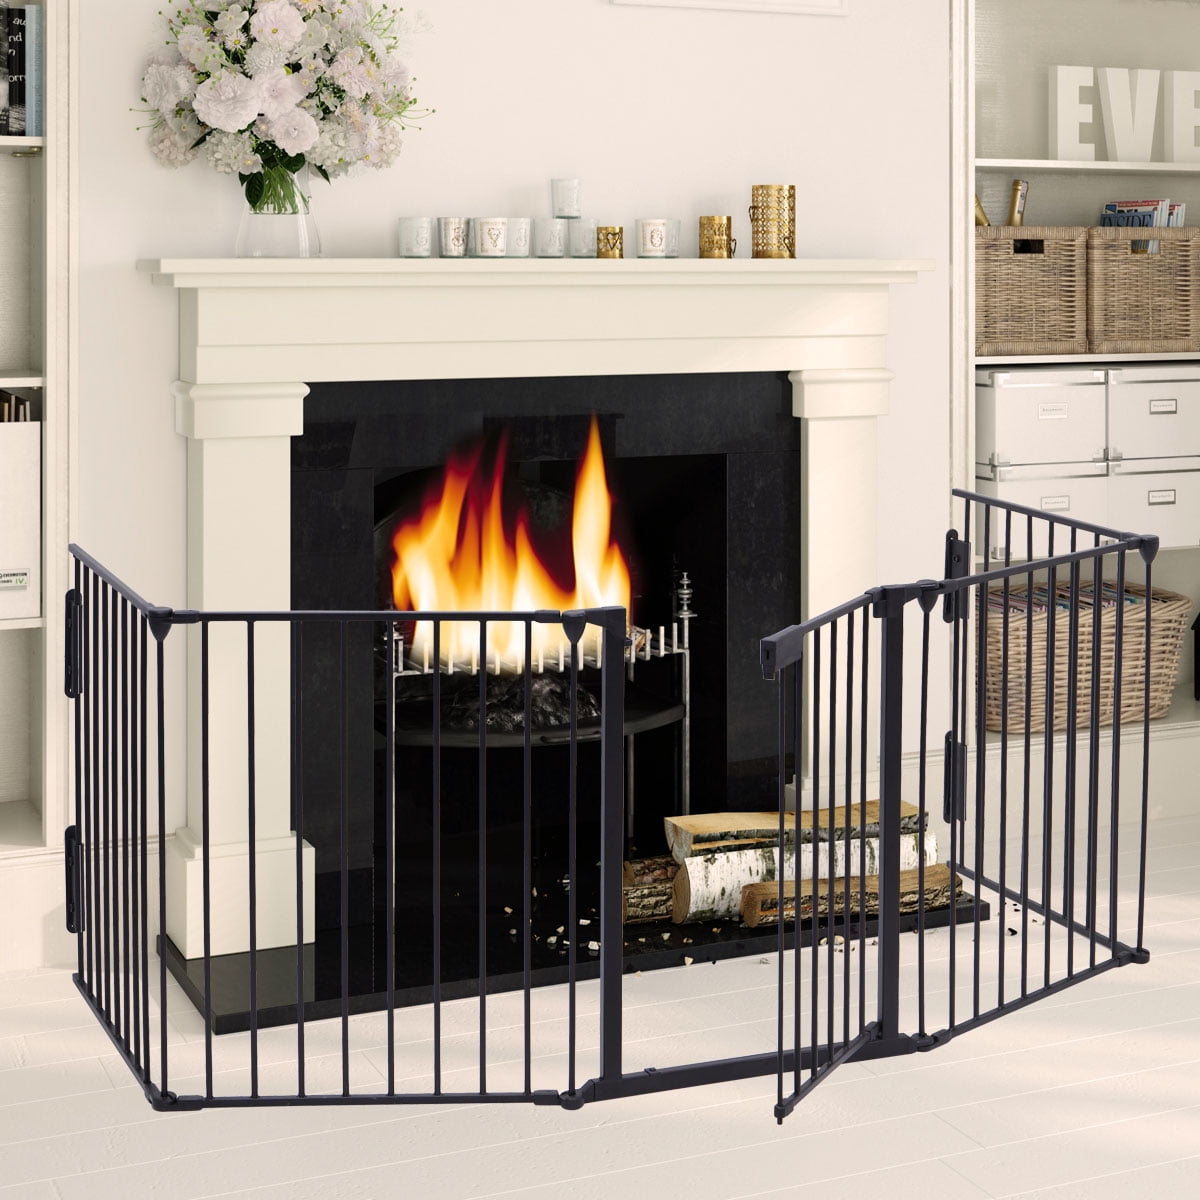 Pet Isolation Fence with Walk-Through Door BBQ Metal Fire Gate Costzon Fireplace Gate 6-Panel Foldable Pet Gates for Easy with Add/Decrease Panels 6-Panel, Black Freestanding Dog Gates